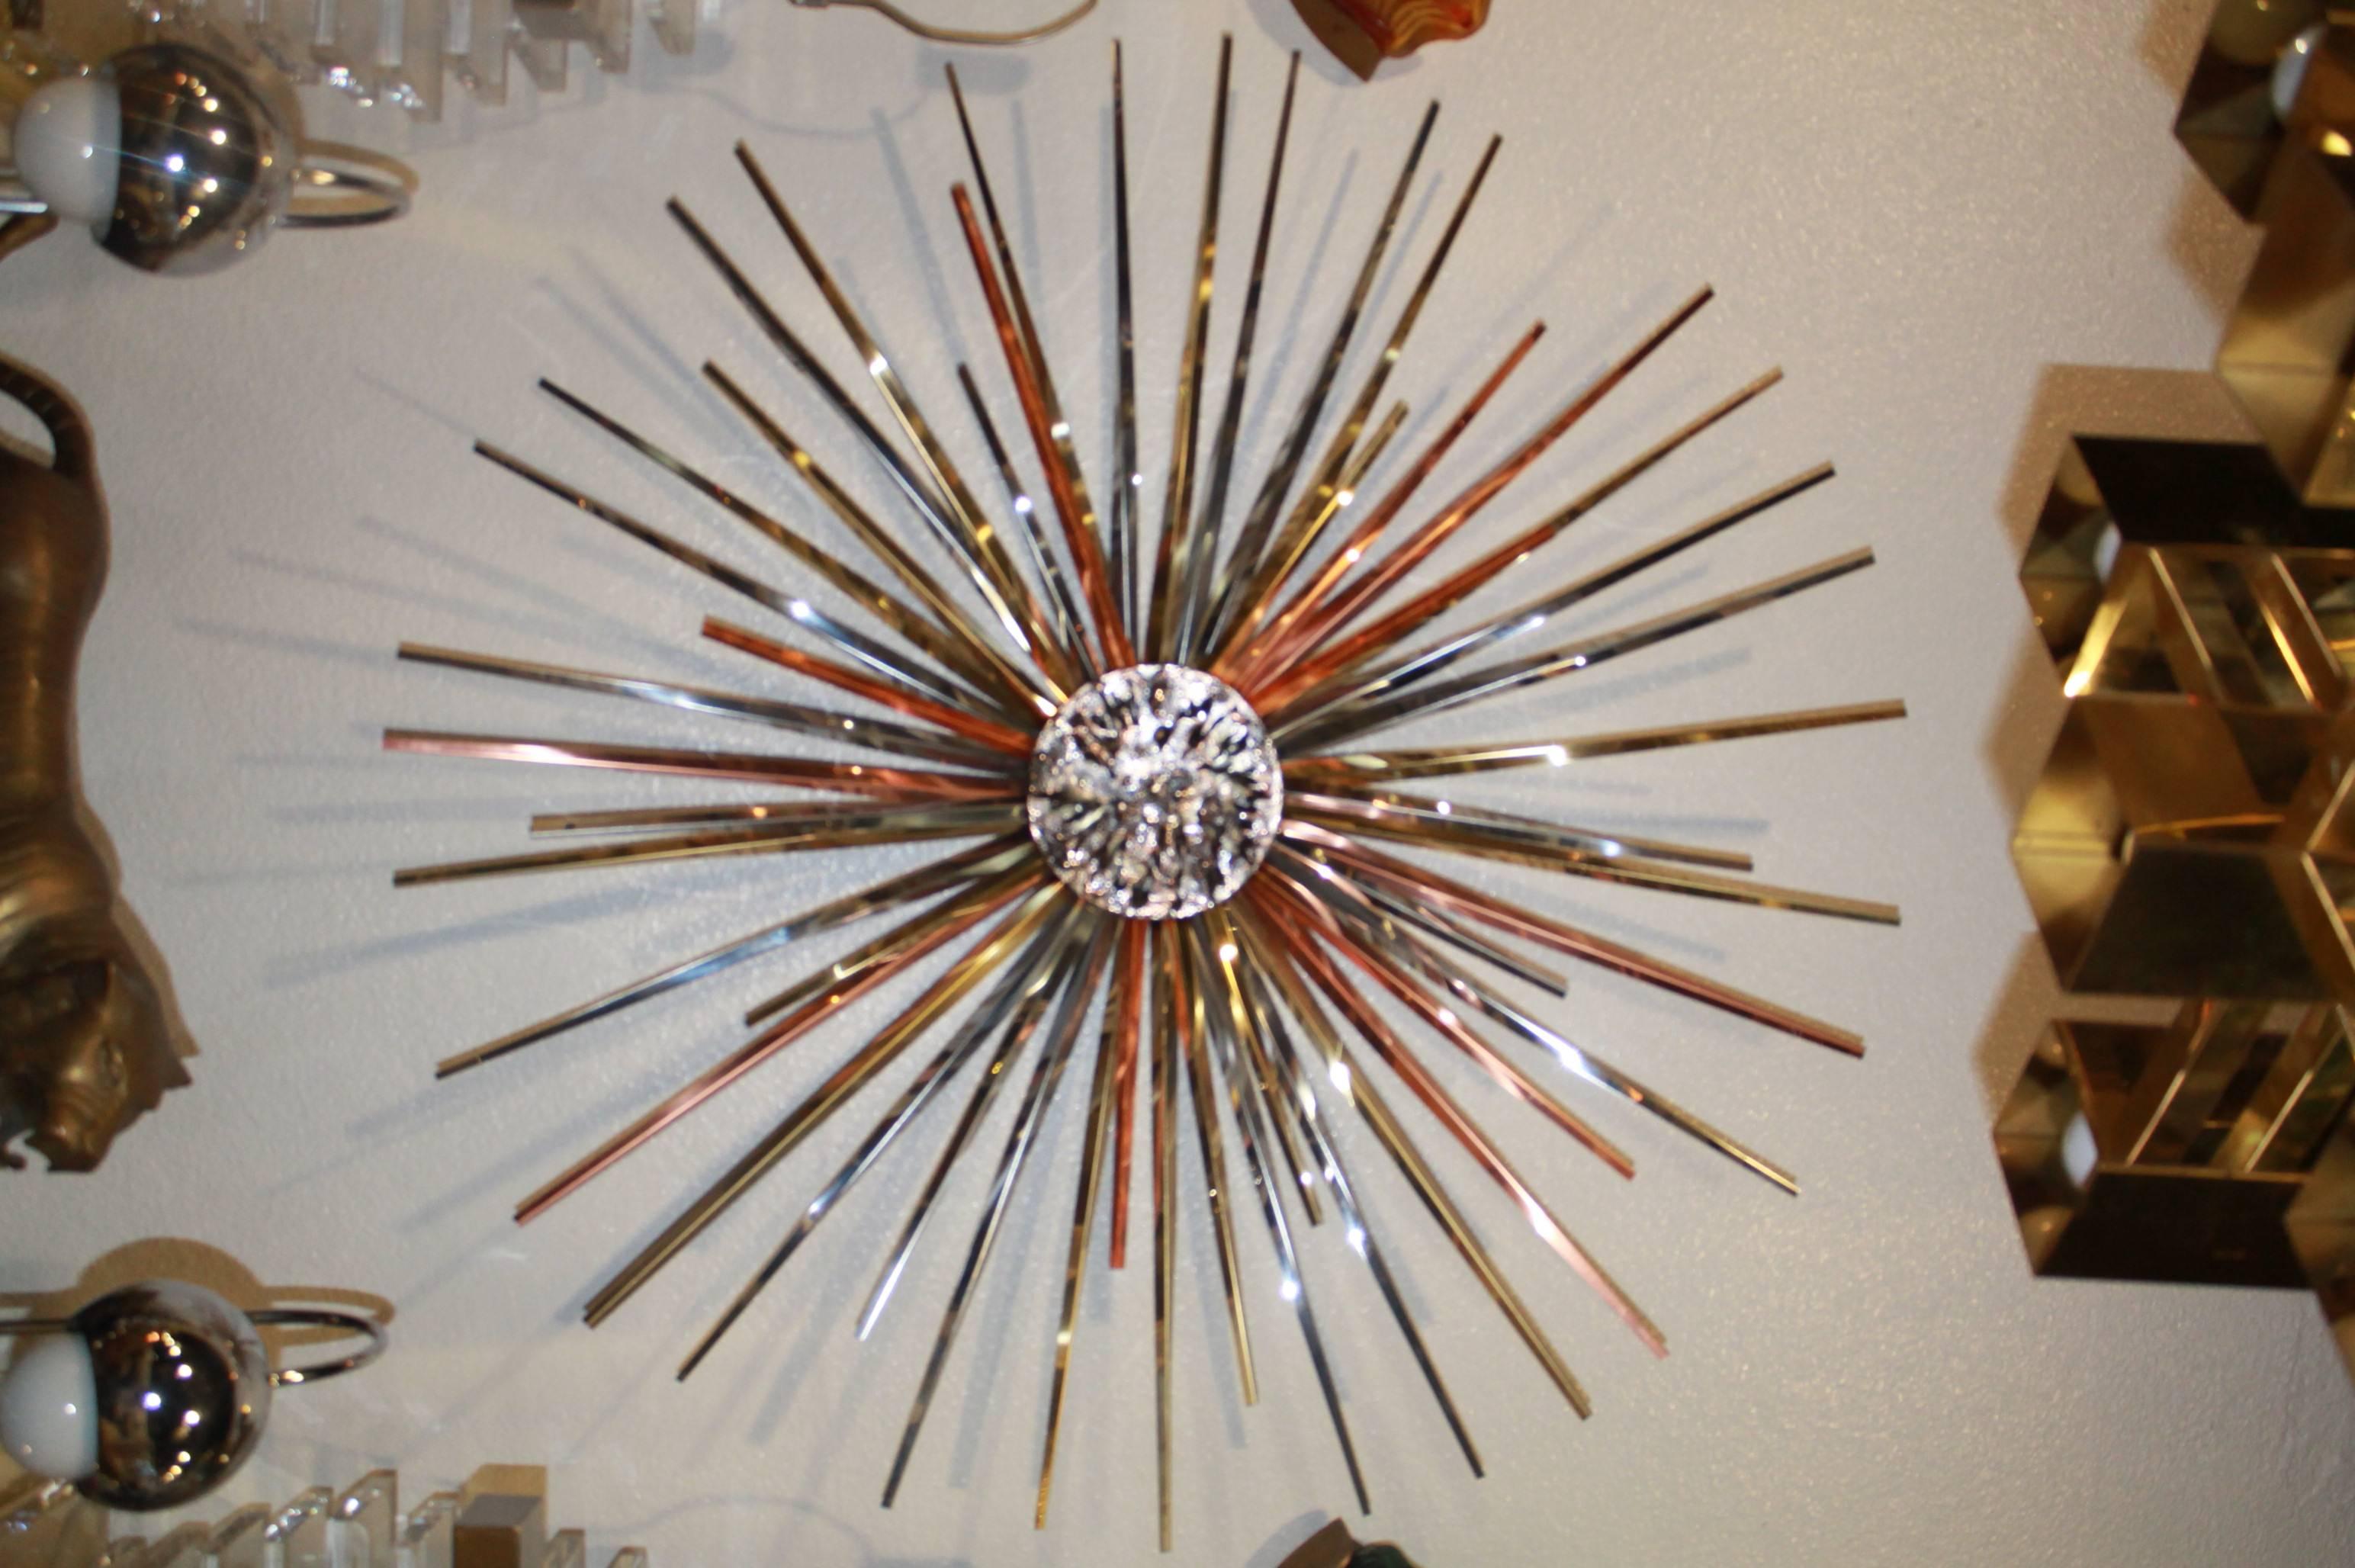 Vintage Signed Curtis Jere 1985 sunburst mixed metals copper, brass, chrome wall art. Ready to hang.

